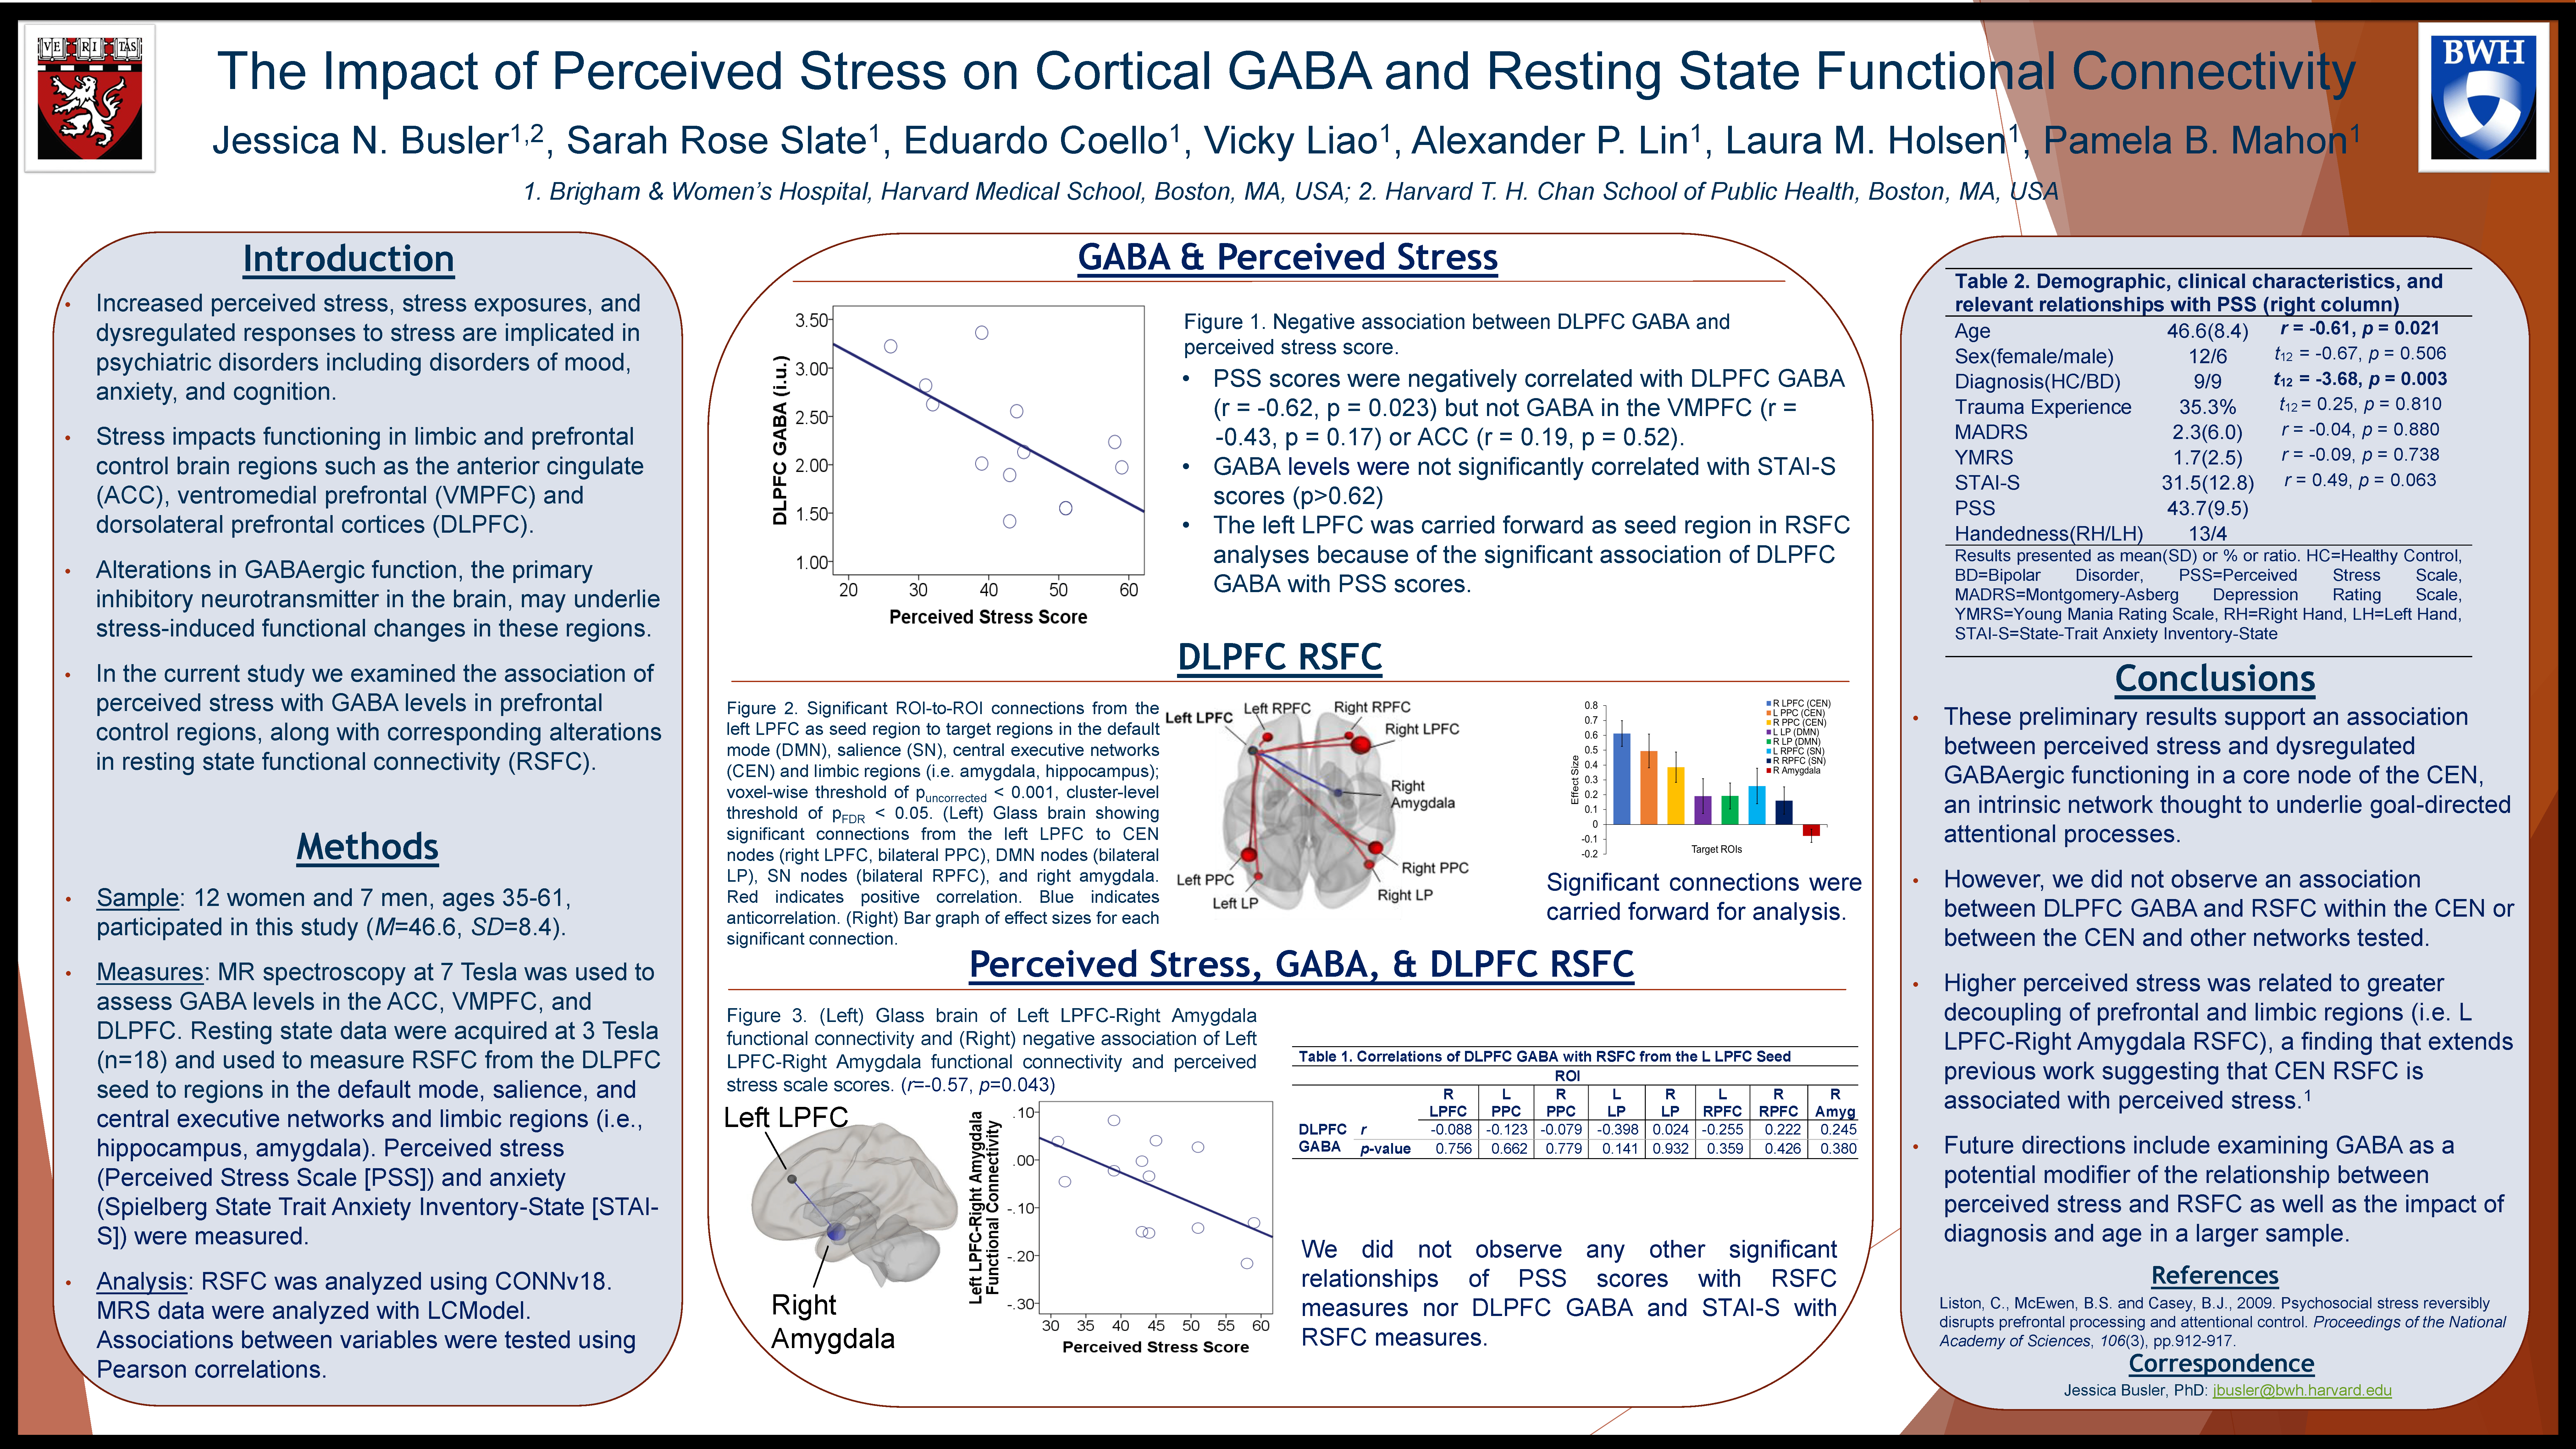 The Impact of Perceived Stress on Cortical GABA and Resting State Functional Connectivity